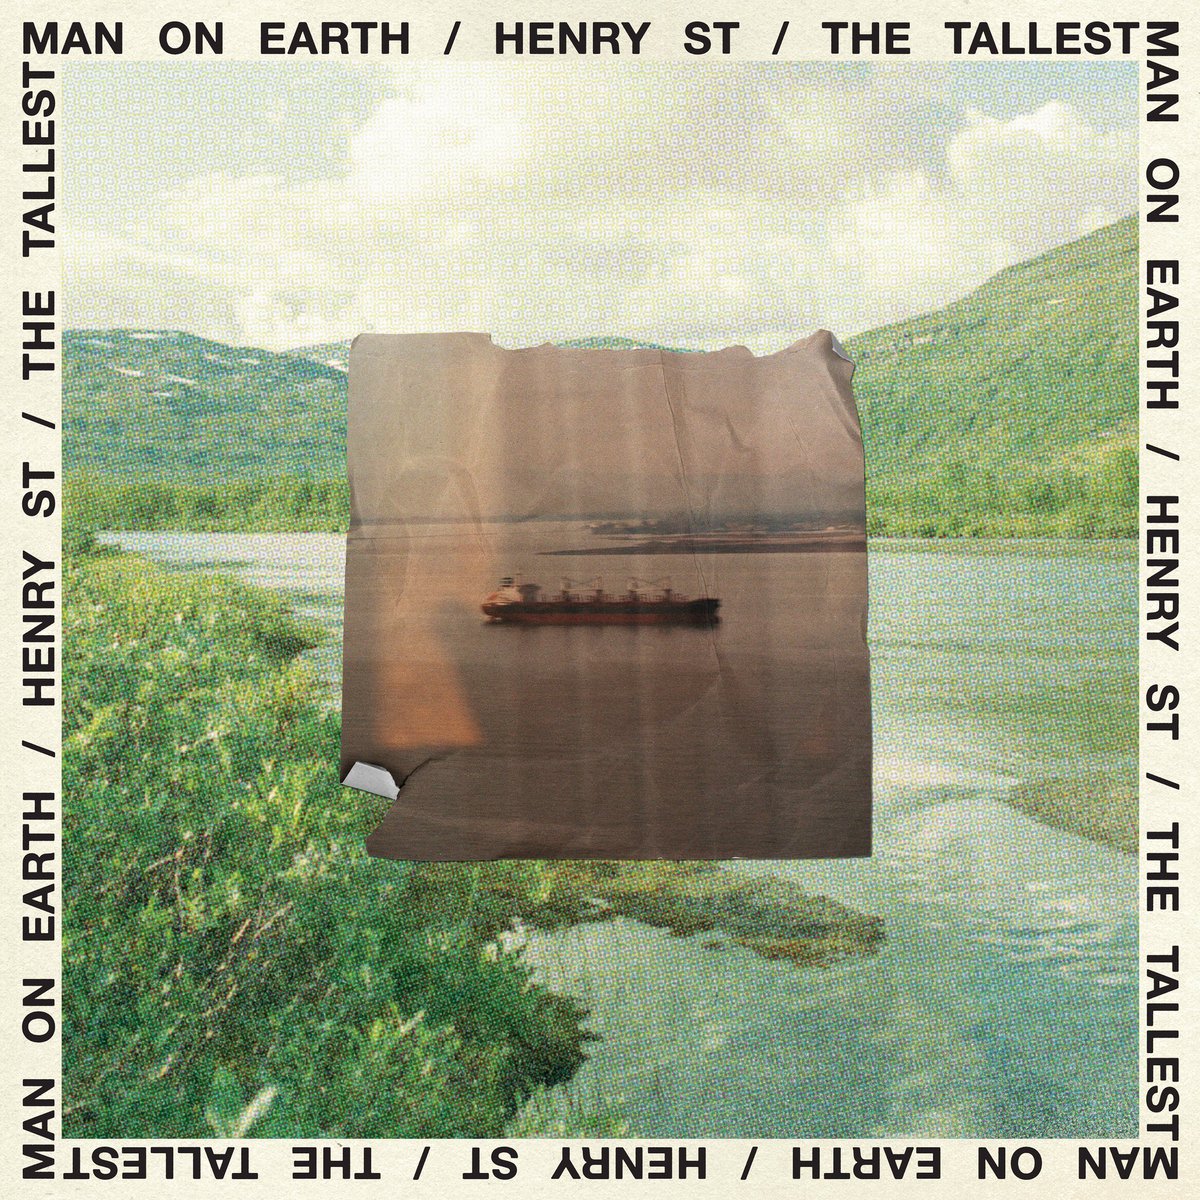 The Tallest Man on Earth’s sixth studio album ‘Henry St.’ is out today, everywhere 🌿 Produced by @MADEOFOAK, @tallestman describes it as “the most playful, most me album yet.”

🤍give it a spin - thetallestmanonearth.ffm.to/henryst